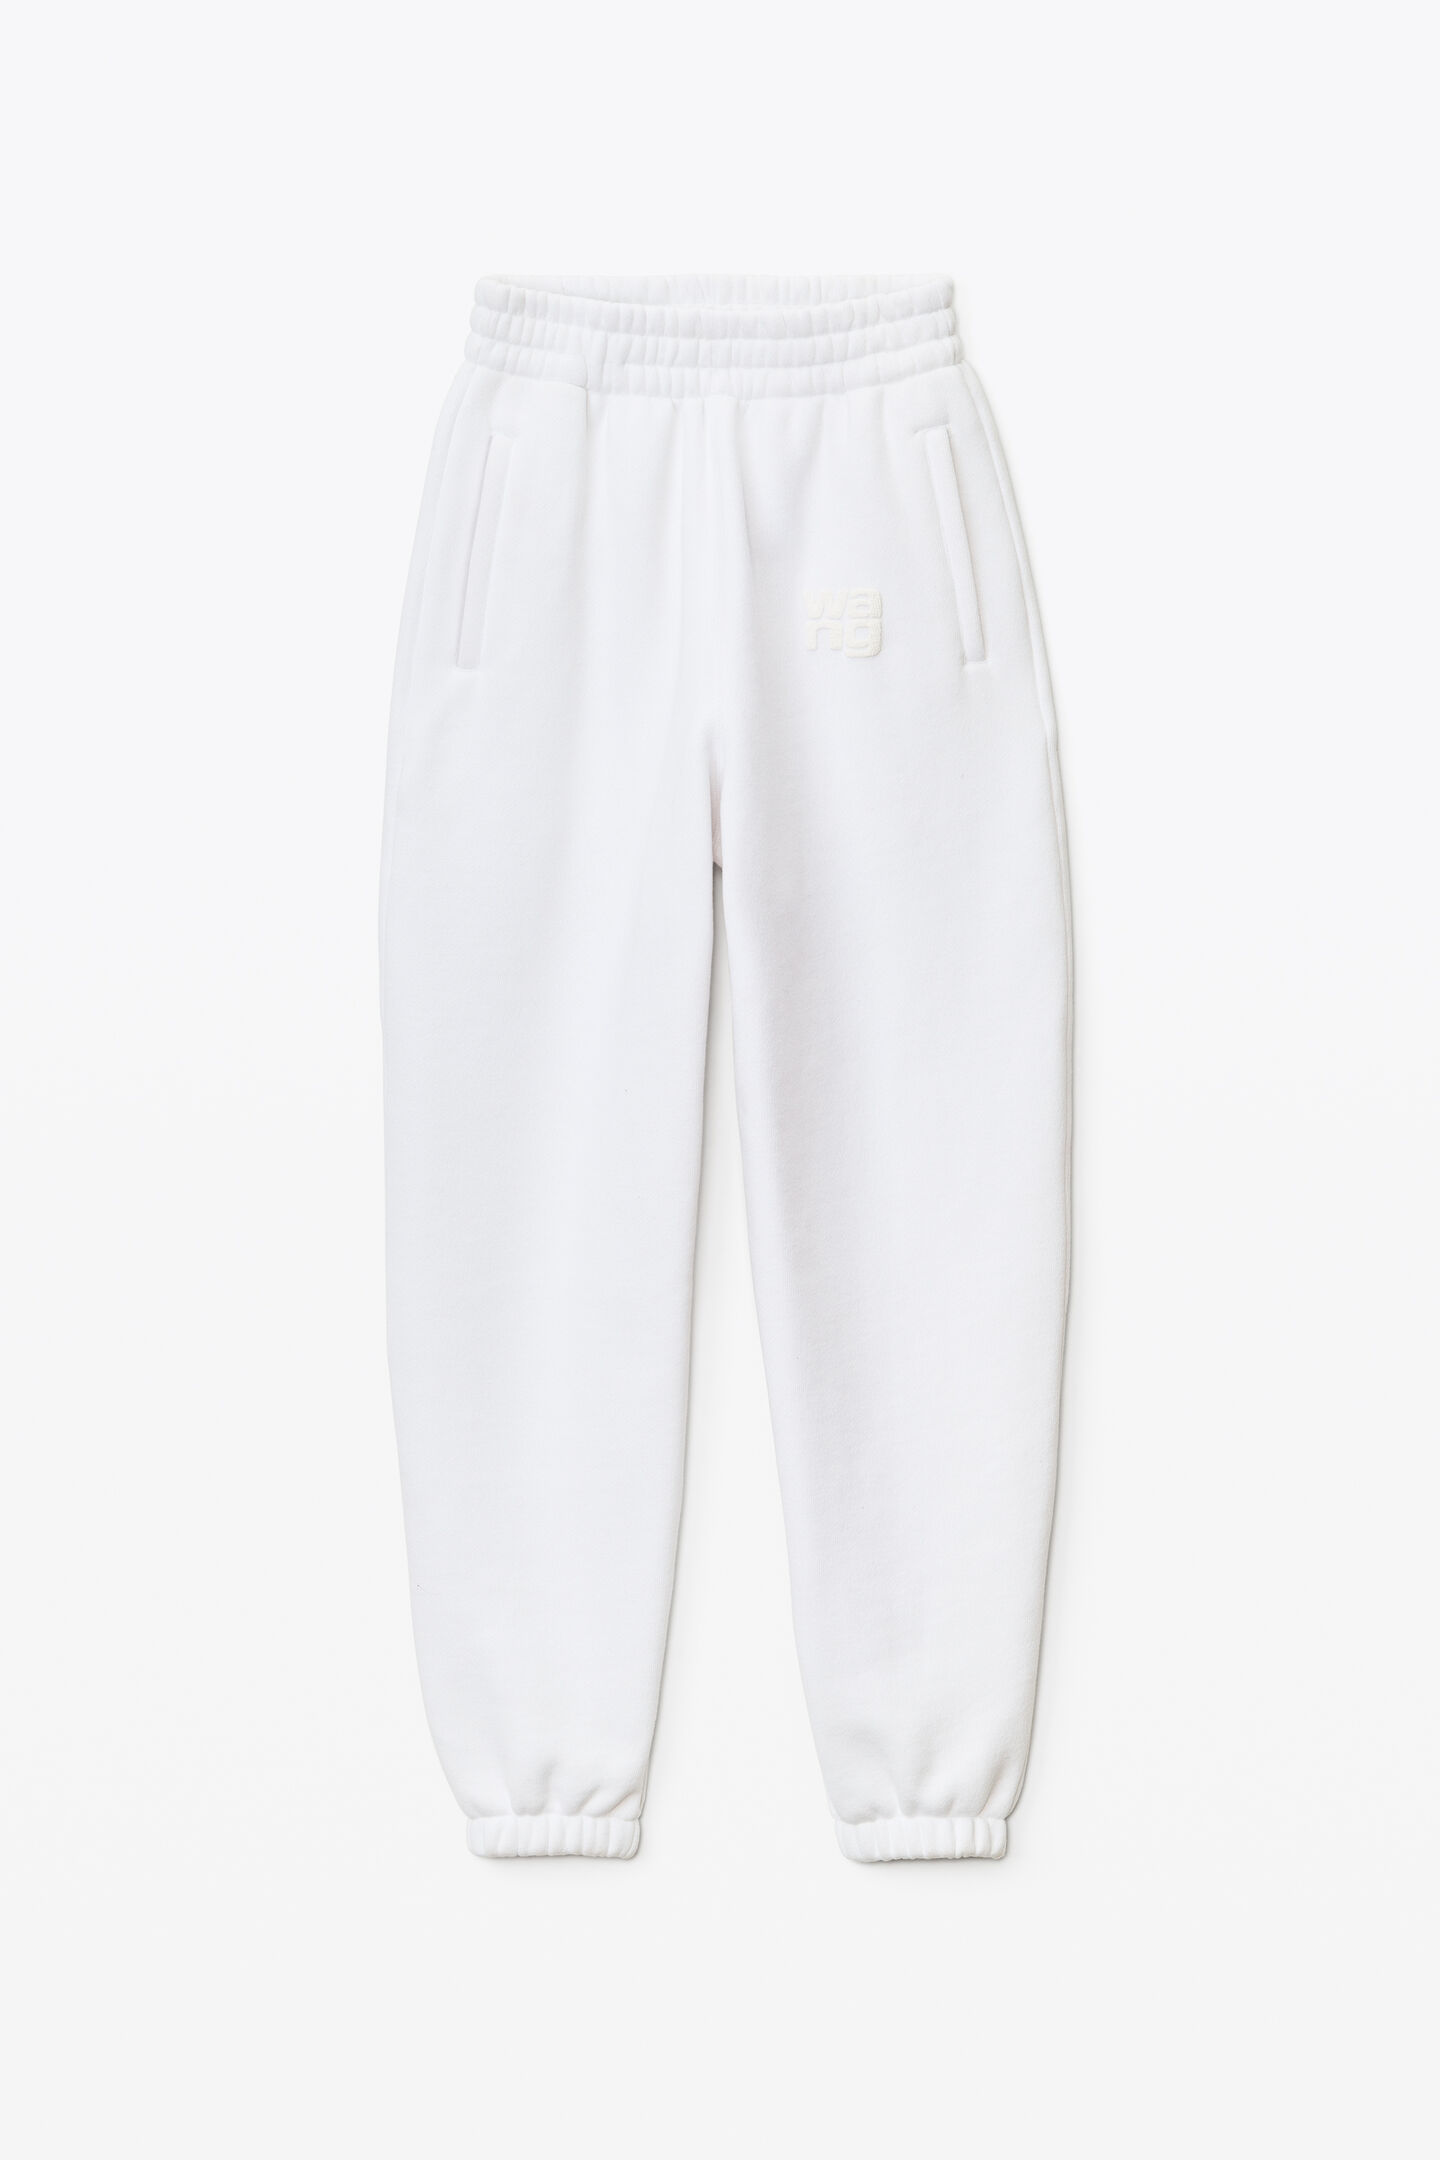 UVM Tapered Sweatpant - Ruggers Team Stores